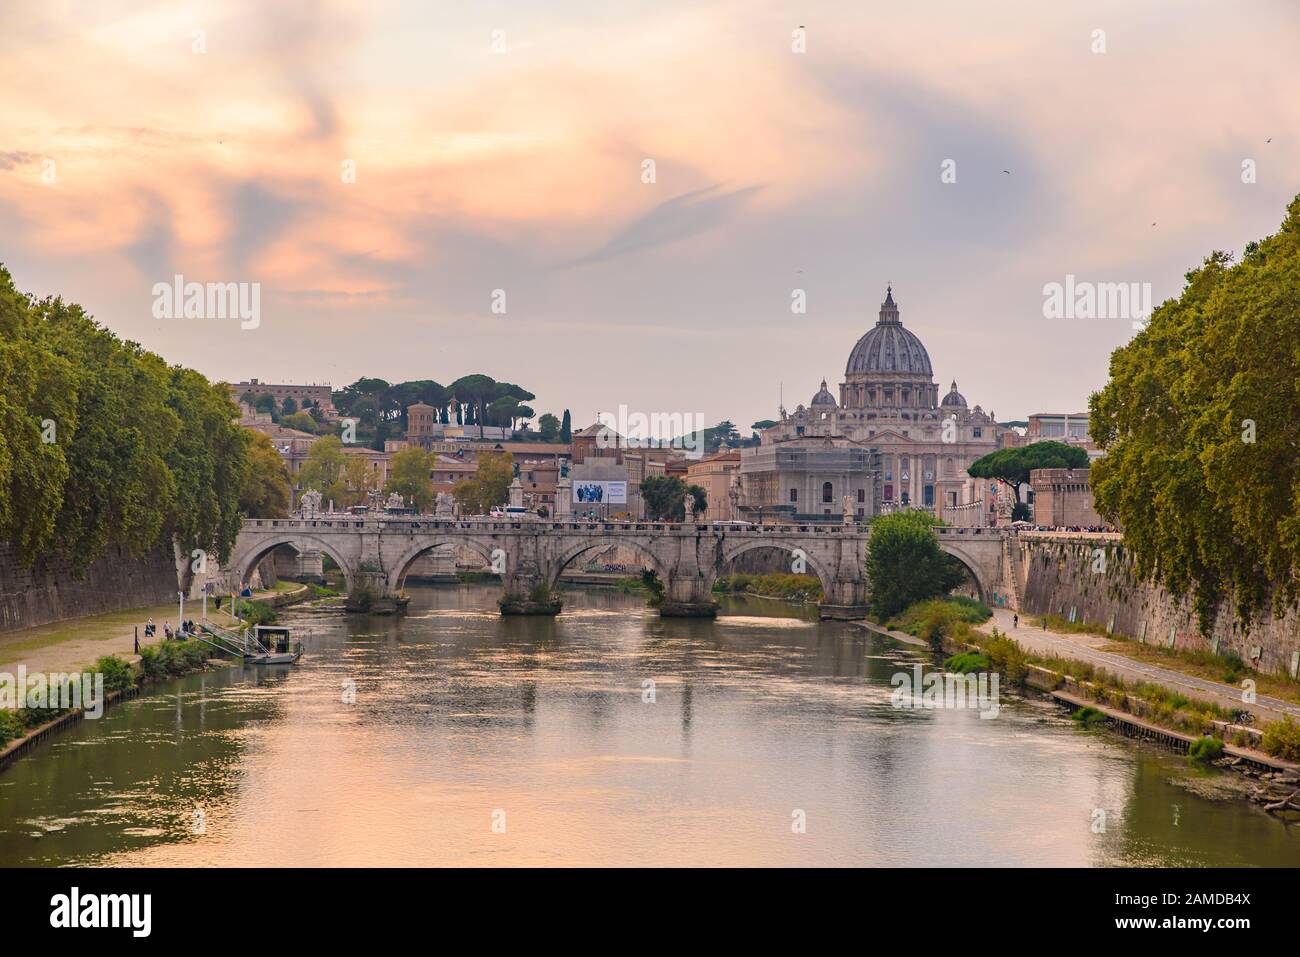 Sunset view of St. Peter's Basilica, Ponte Sant'Angelo, and Tiber River in Rome, Italy Stock Photo